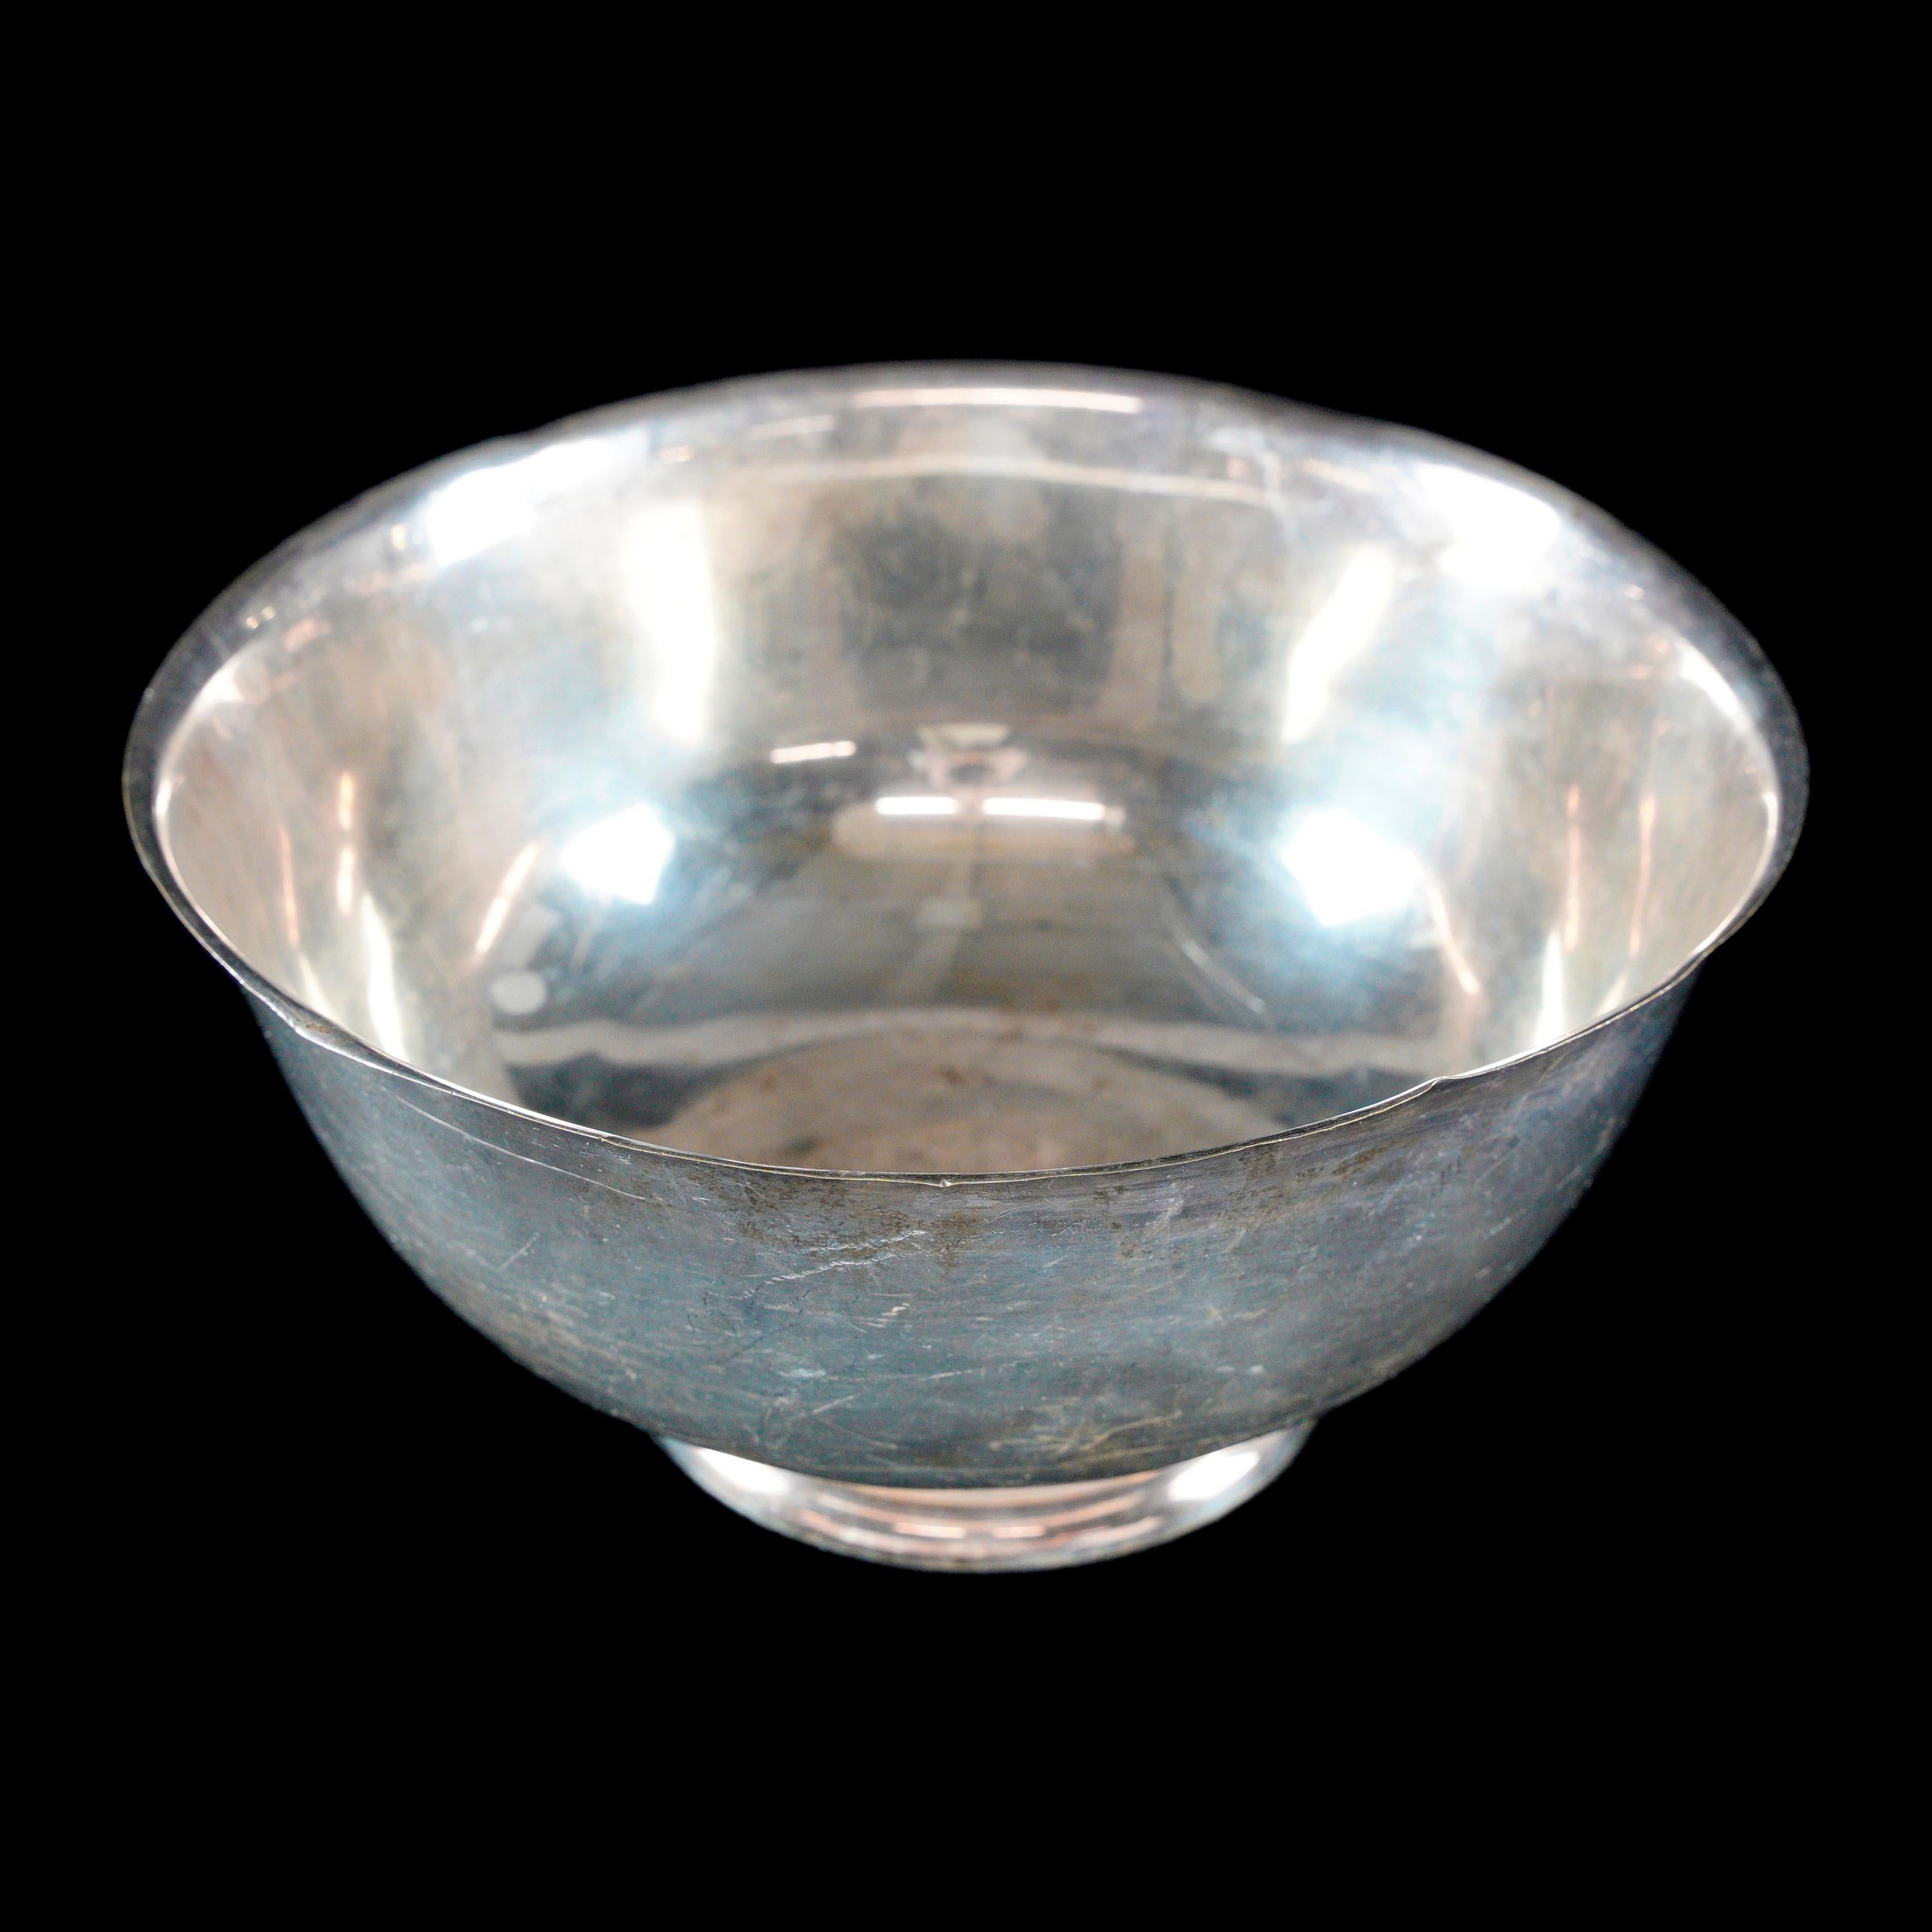 Round stainless steel serving bowl acquired from the prestigious Waldorf Astoria Hotel in New York City. This is in fair condition. with minordents in the rim and side. Made by Mesoware. Waldorf Astoria authenticity card included with your purchase.